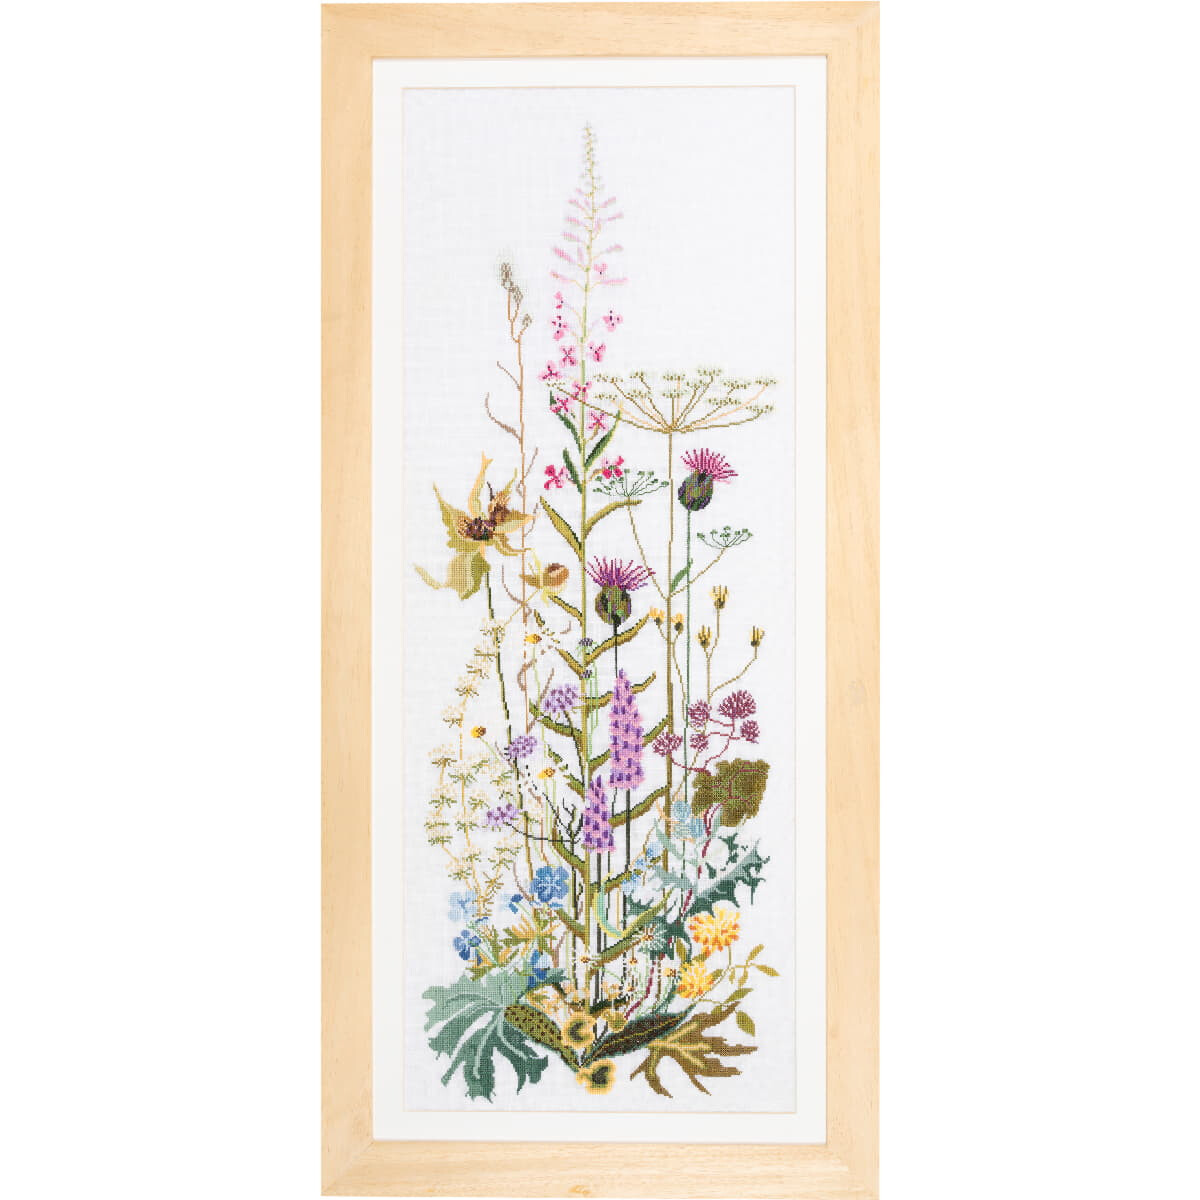 Thea Gouverneur counted cross stitch kit "Wild...